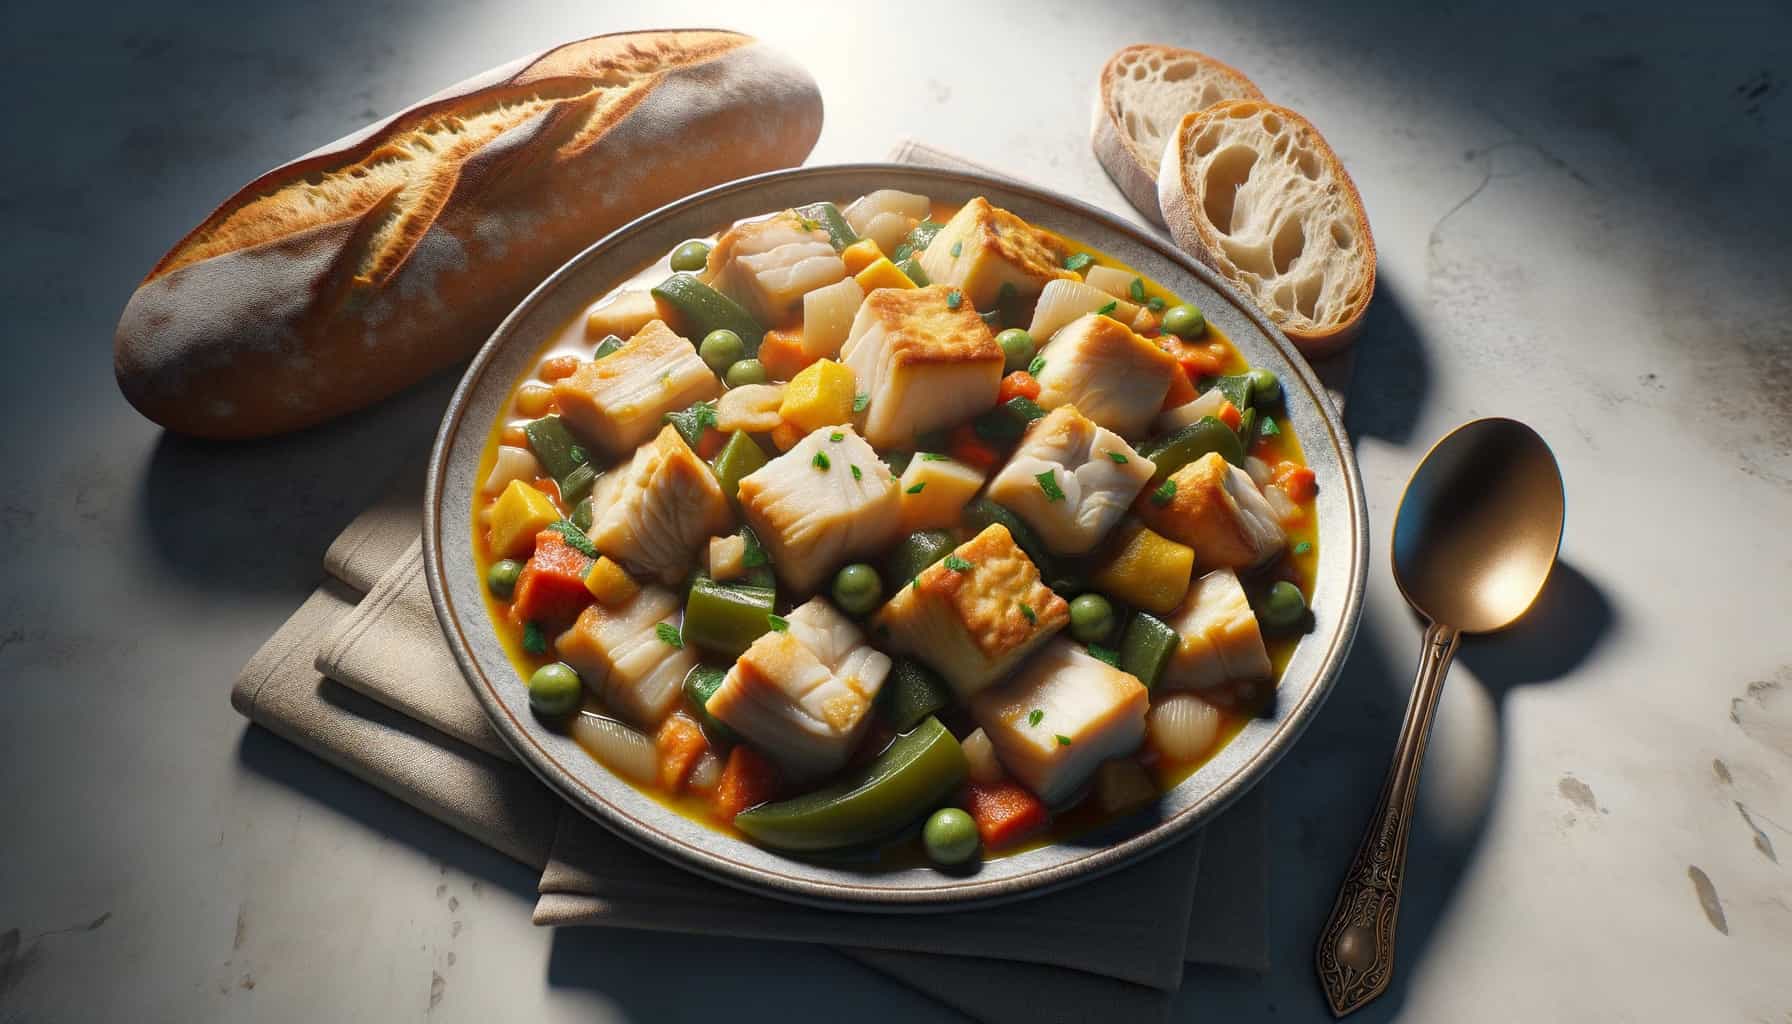 Bacalhau (salt cod stew) is served on a plate with a side of crusty bread. The stew's texture, with chunks of salt cod and vegetables.